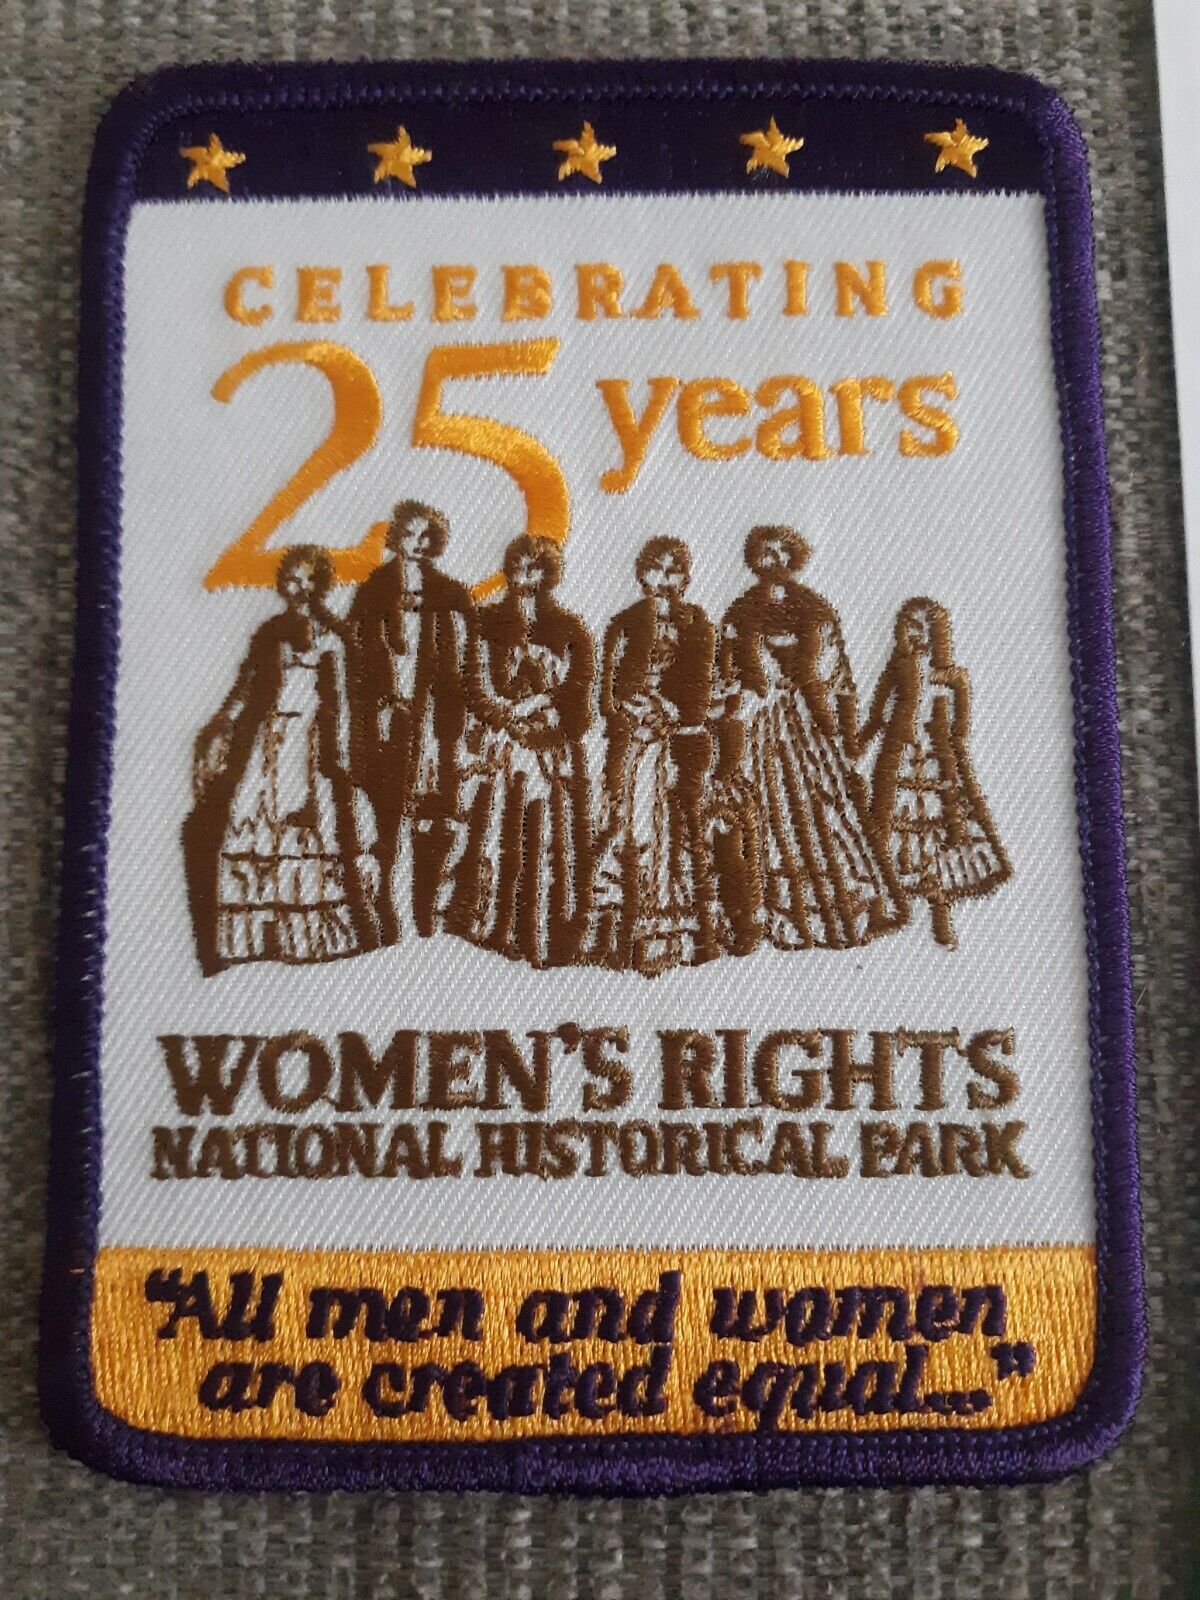 Womens Rights National Historical Park 25th Year Anniversary Patch